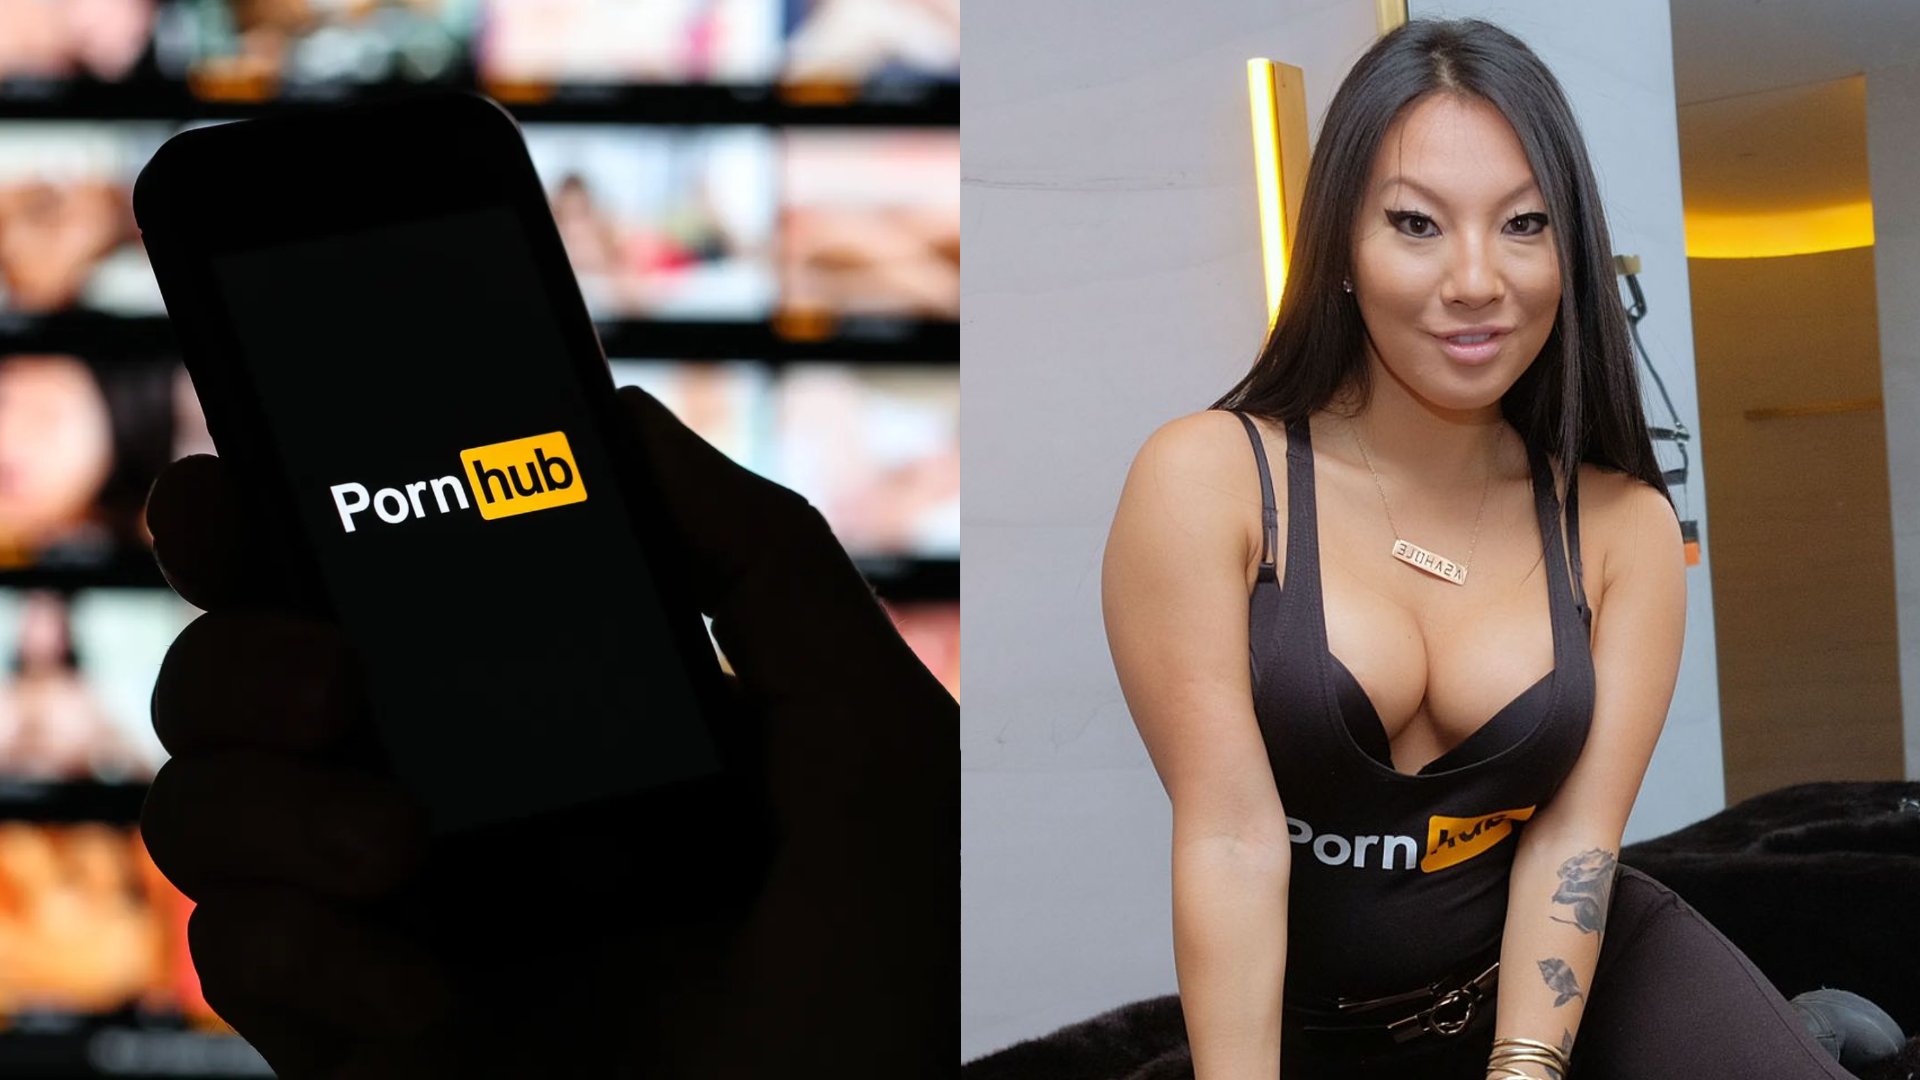 Prnhub - Pornhub Sold To Private Equity Firm For Undisclosed Amount